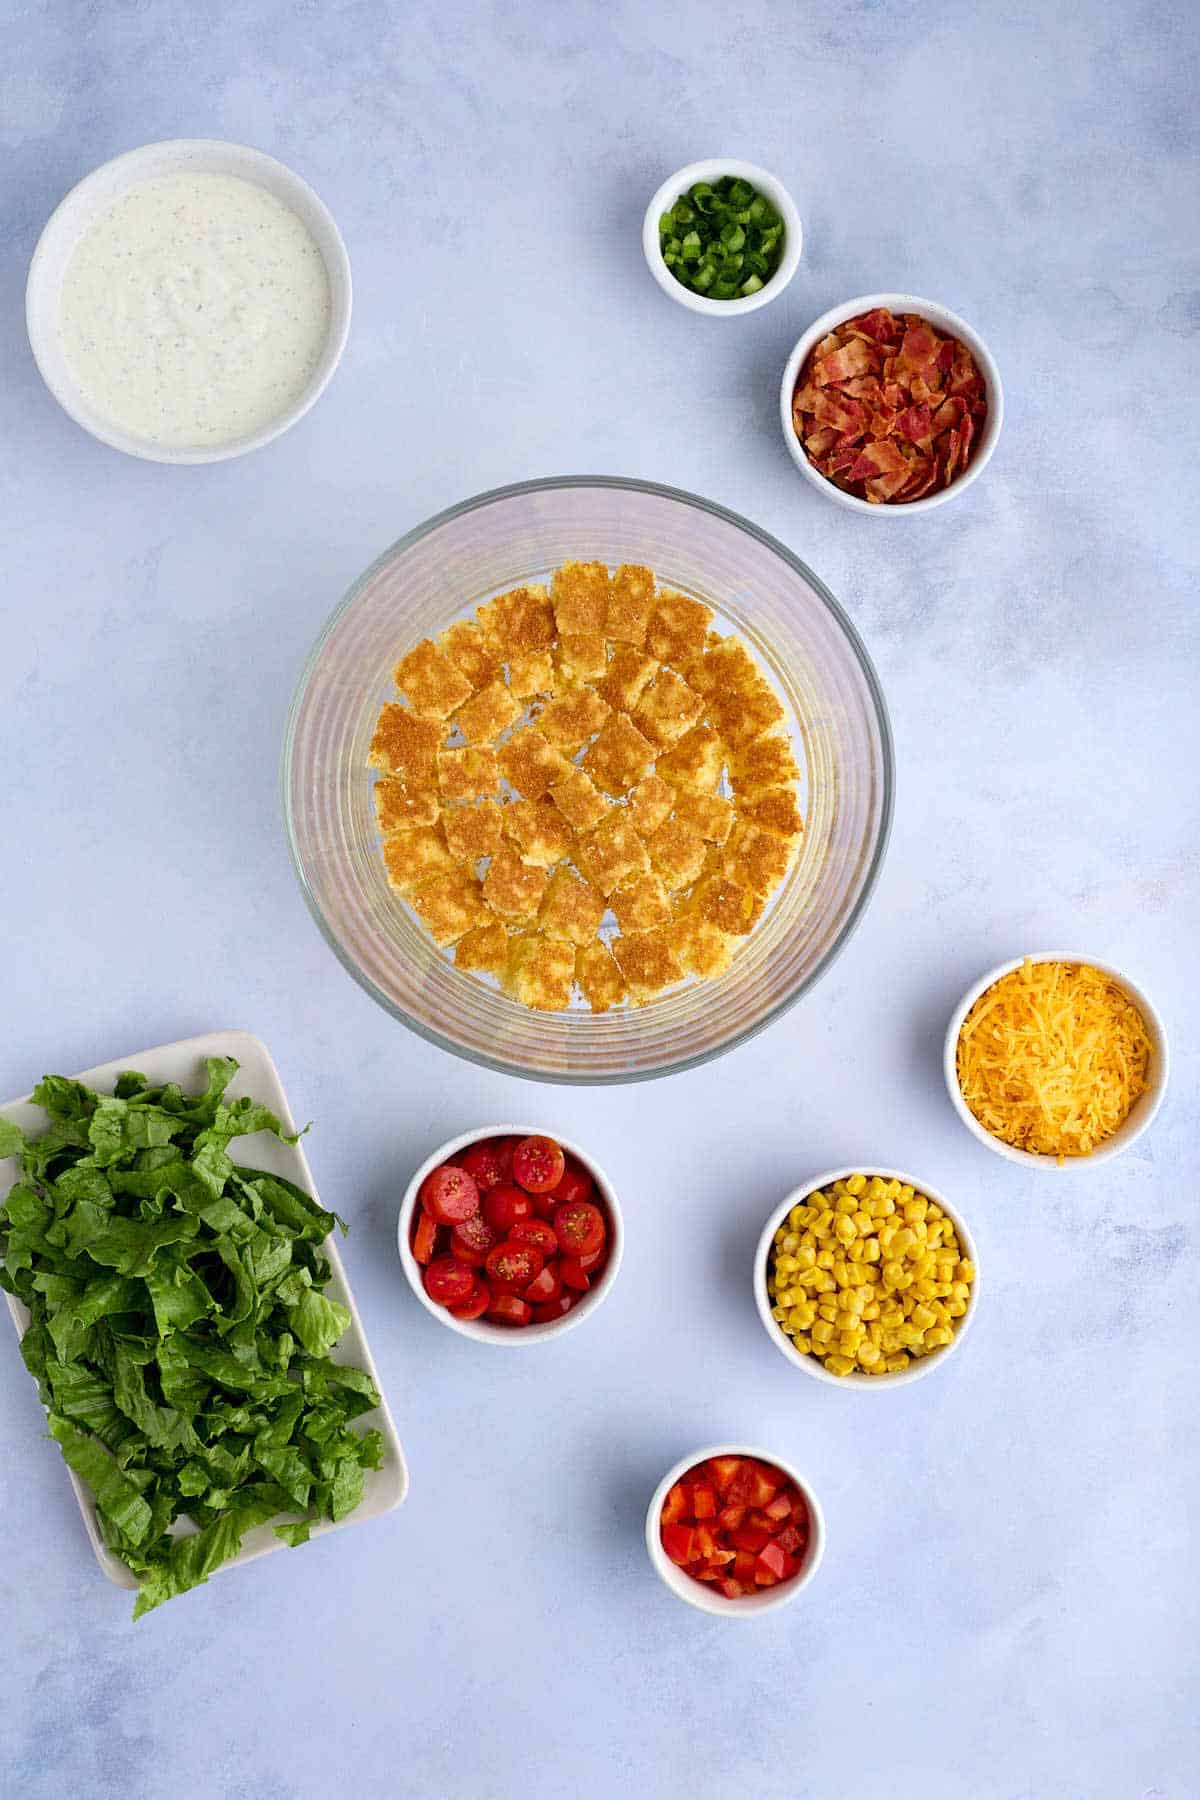 Layer of cornbread in a glass serving dish surrounded by all the rest of the ingredients that will be layered in the salad.